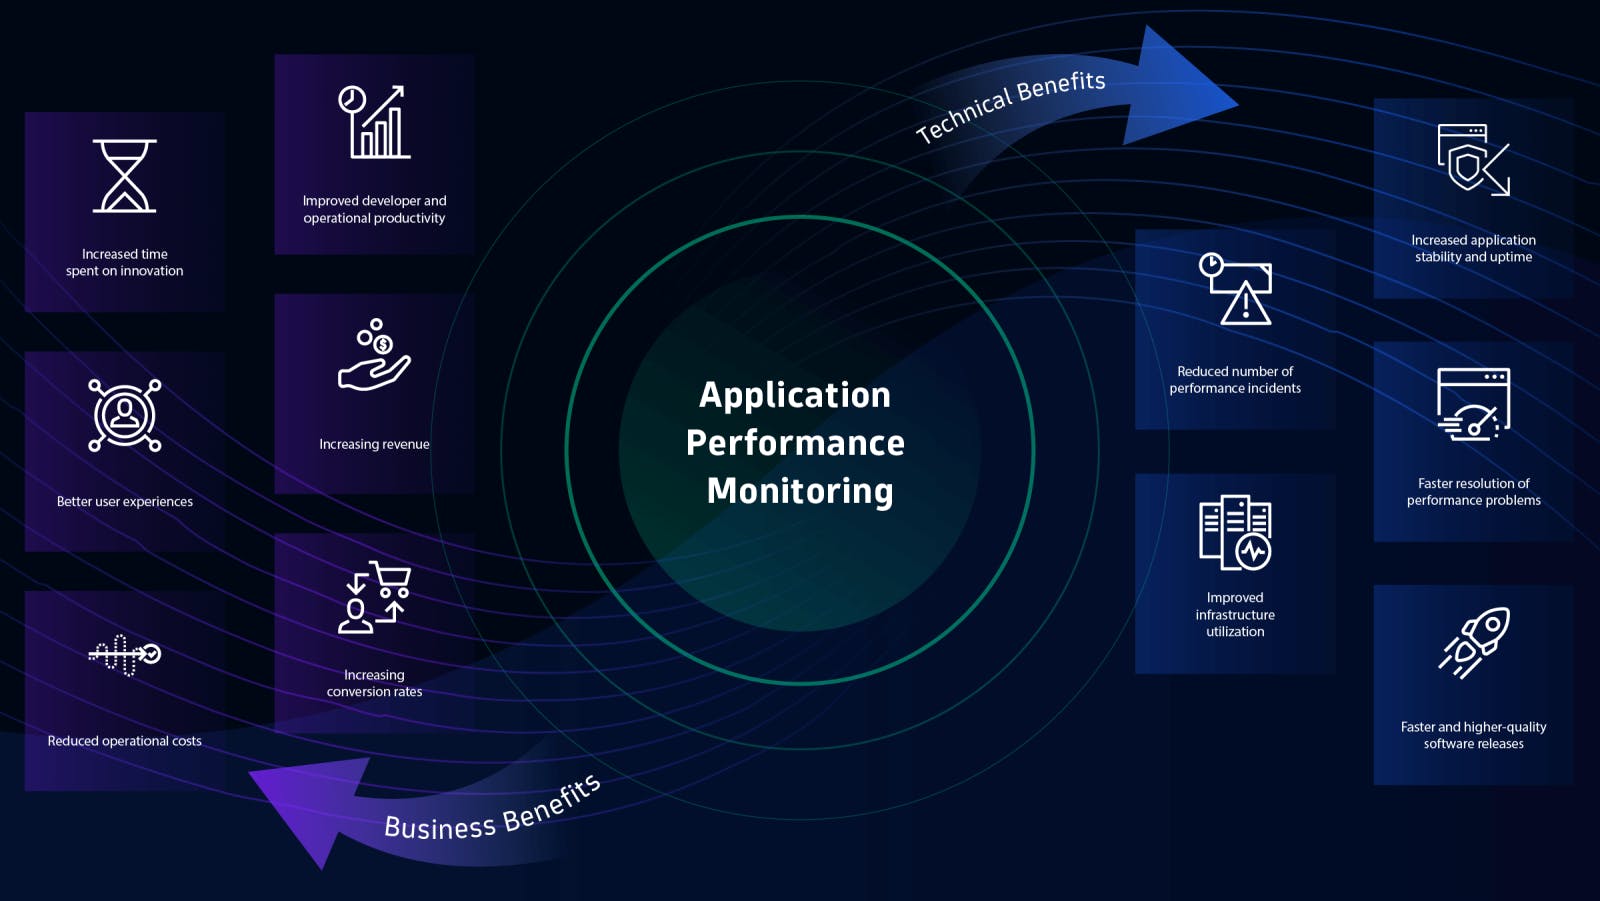 Benefits of Application Performance Monitoring | Source: Dynatrace